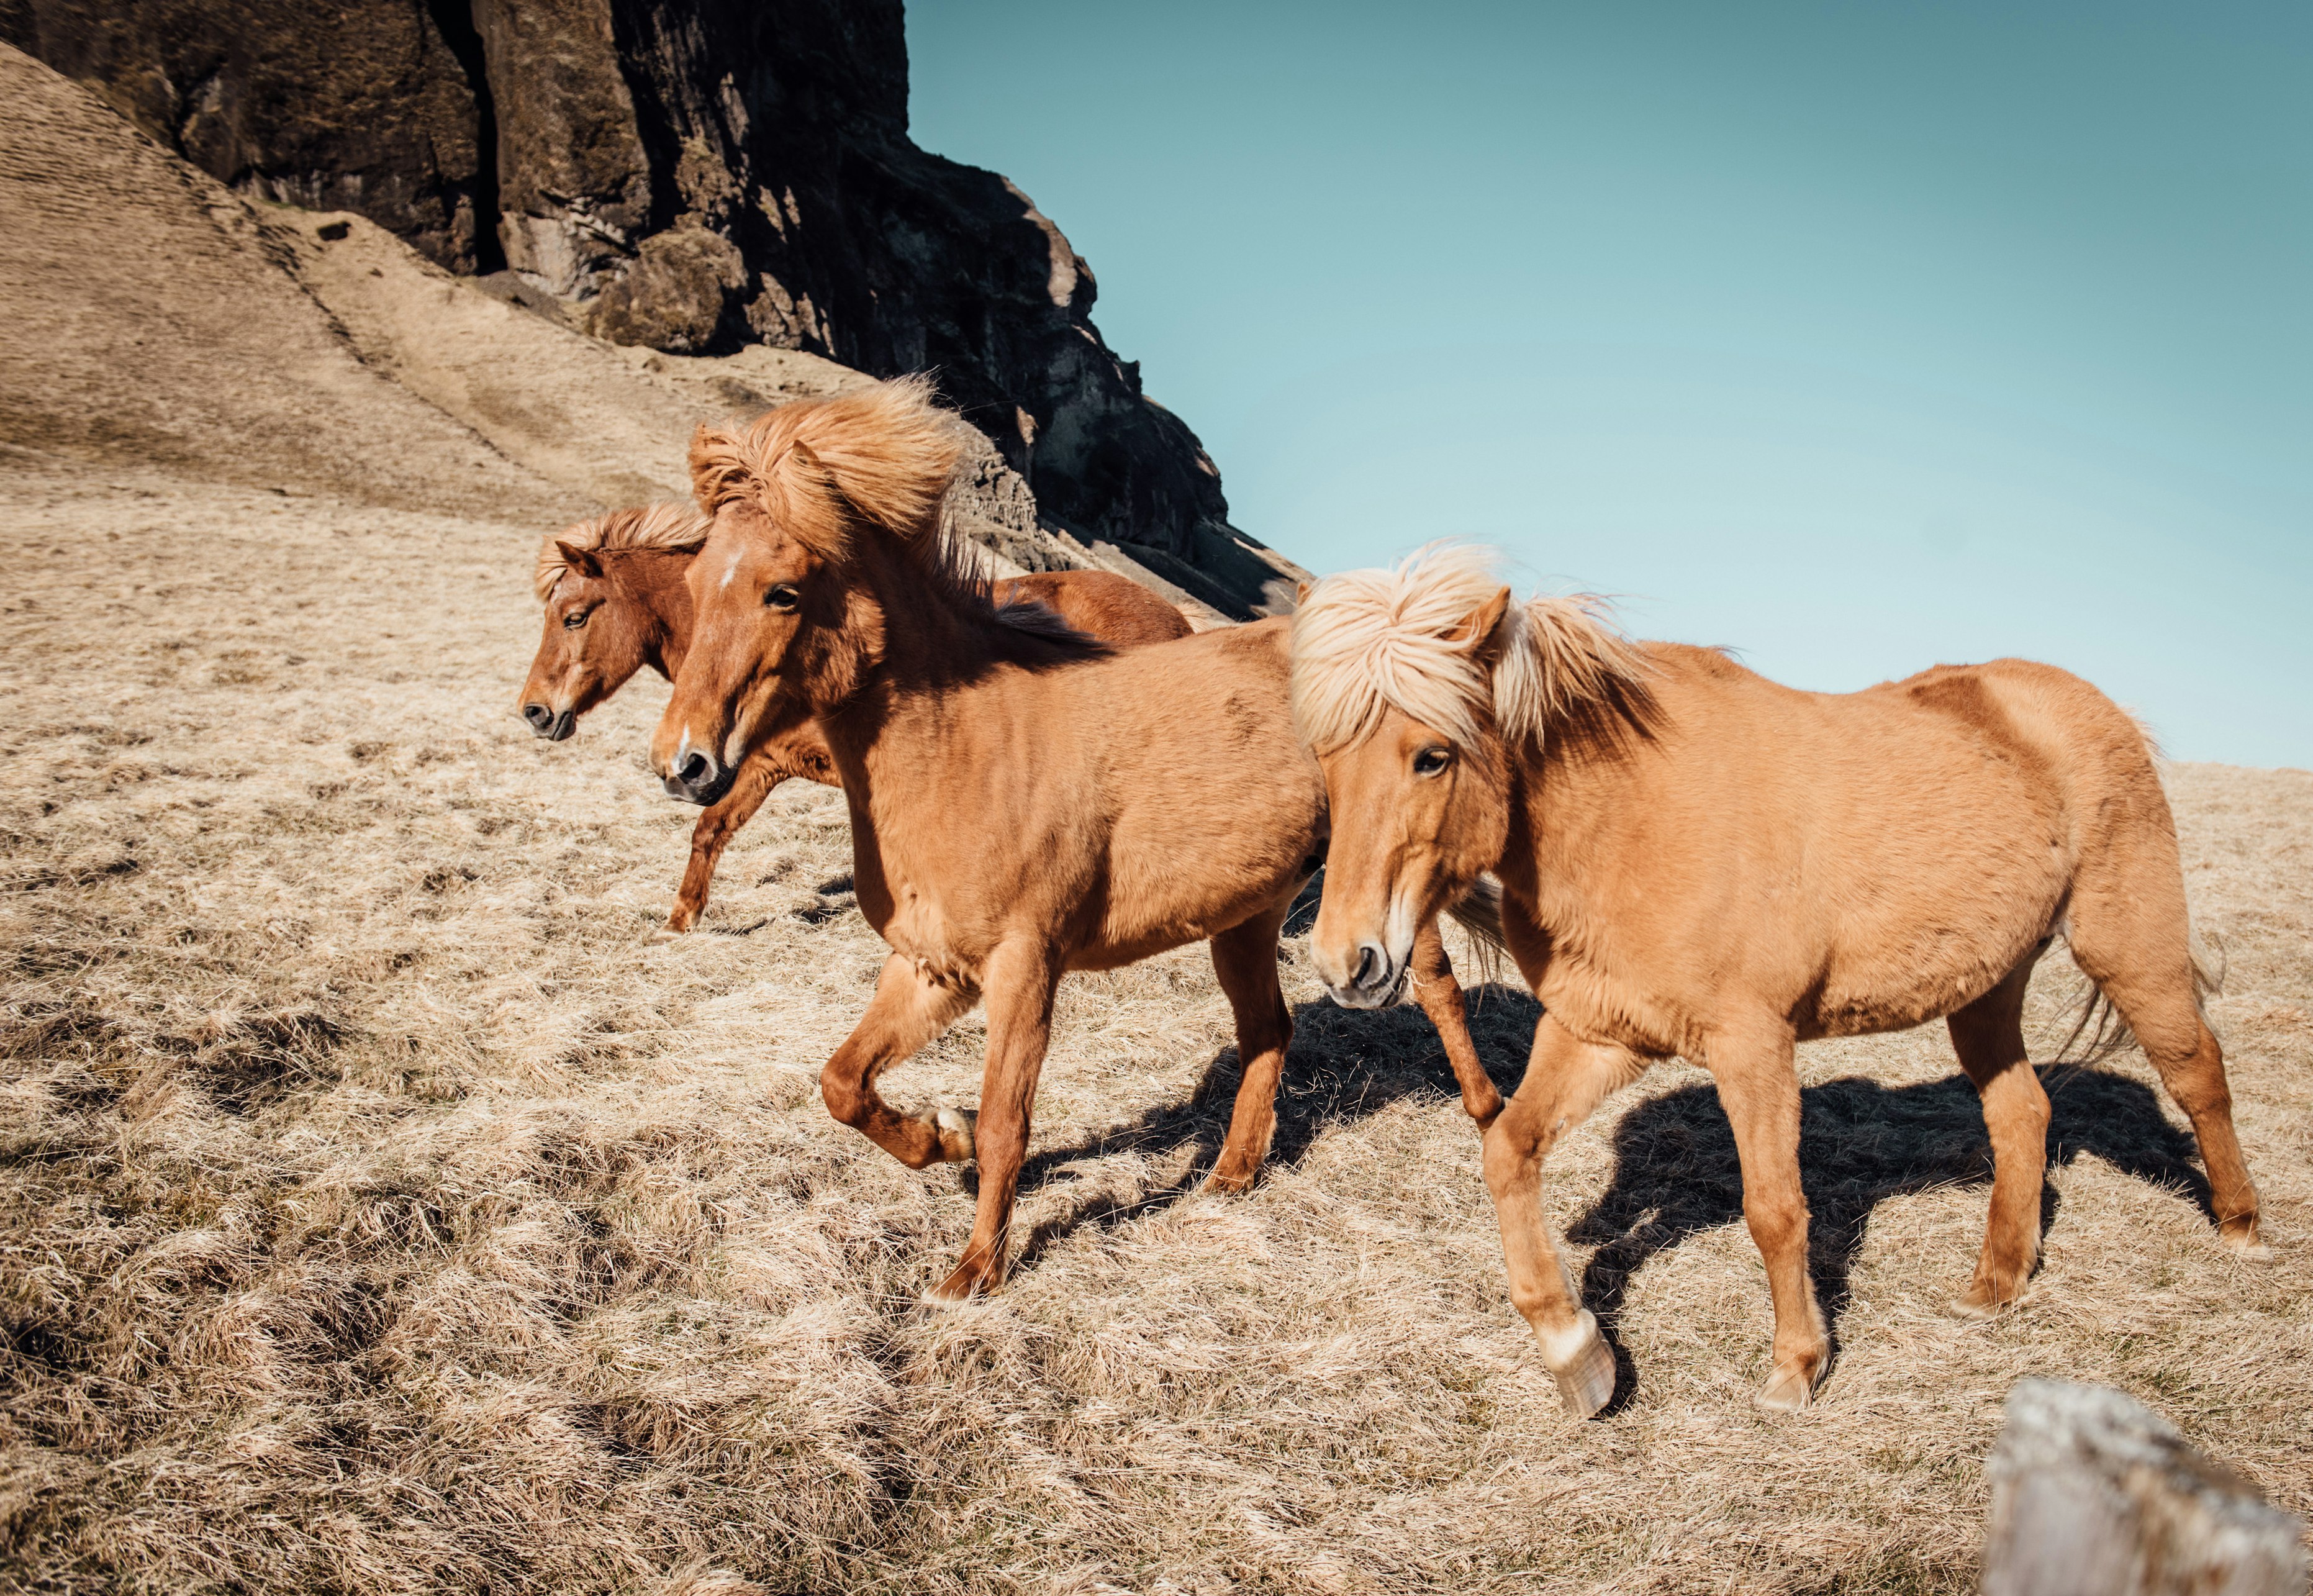 US Vows to Improve Protections for Wild Horse Adoptions